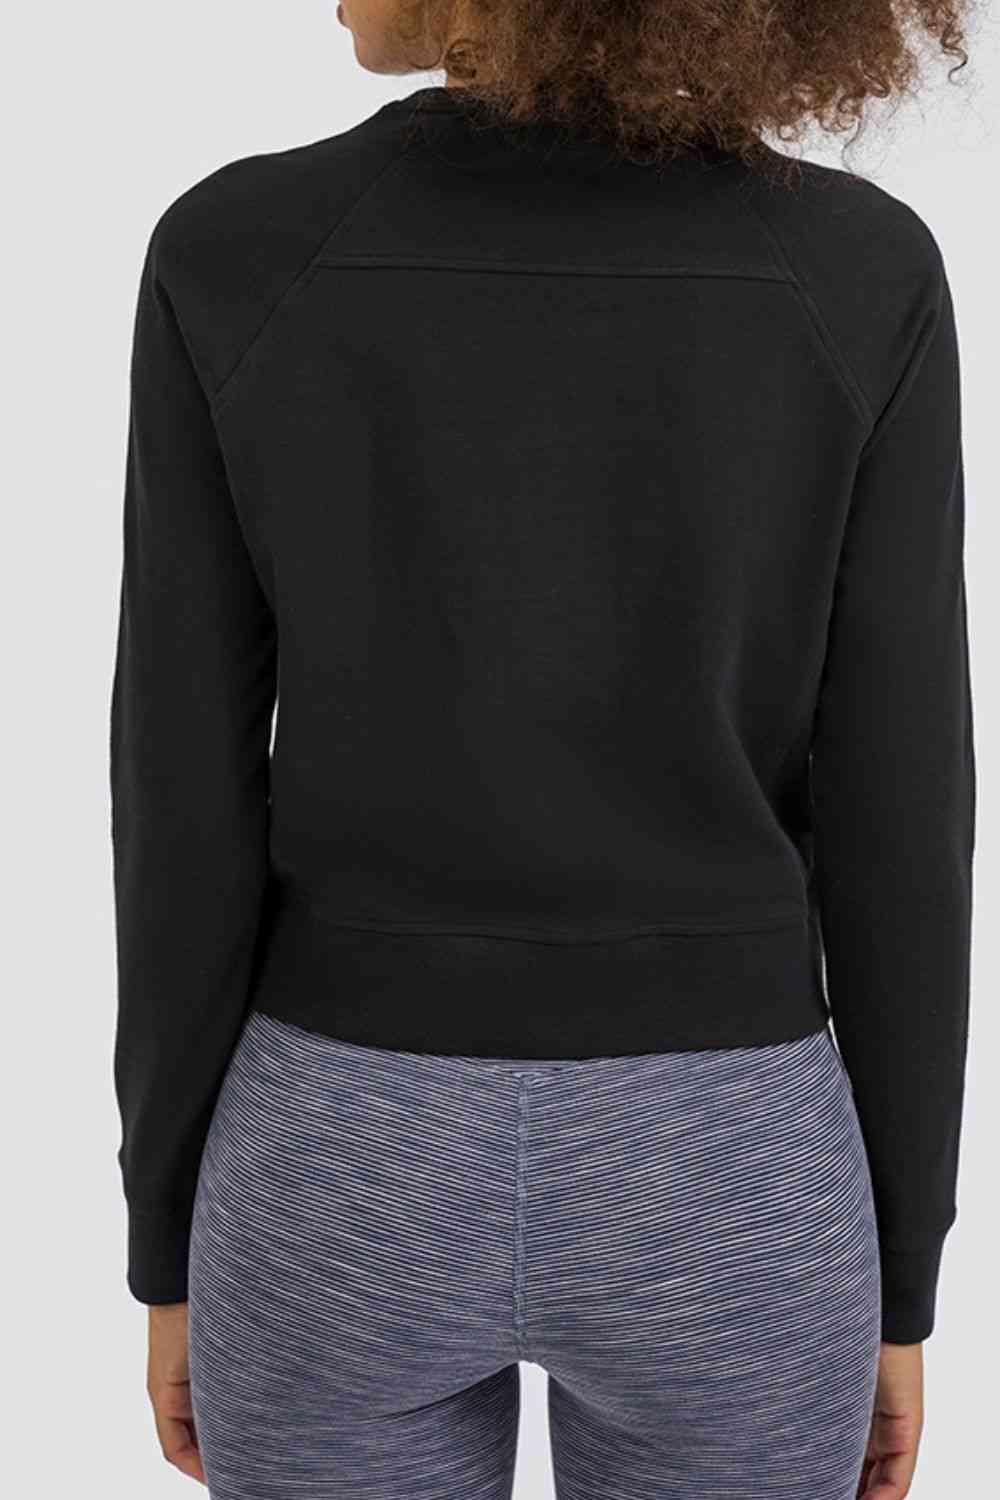 Cozy and Fabulous Raglan Sleeve Sports Top - Immenzive